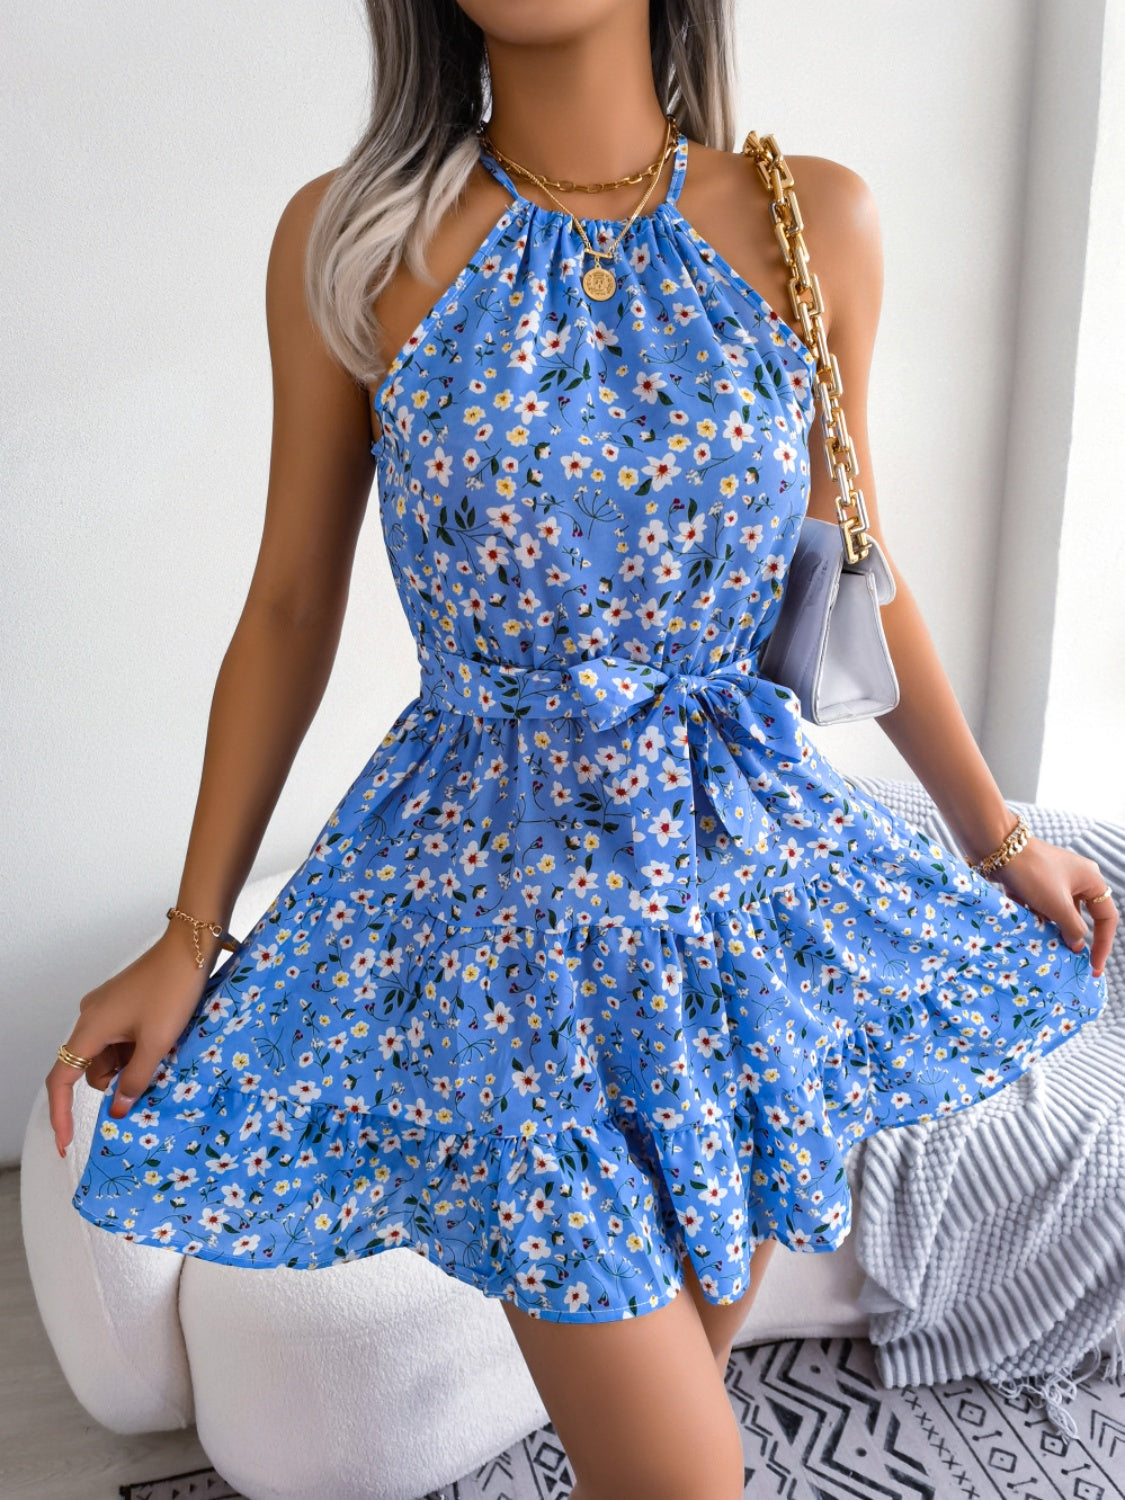 Tied Printed Grecian Neck Mini Dress [ click for additional color options]